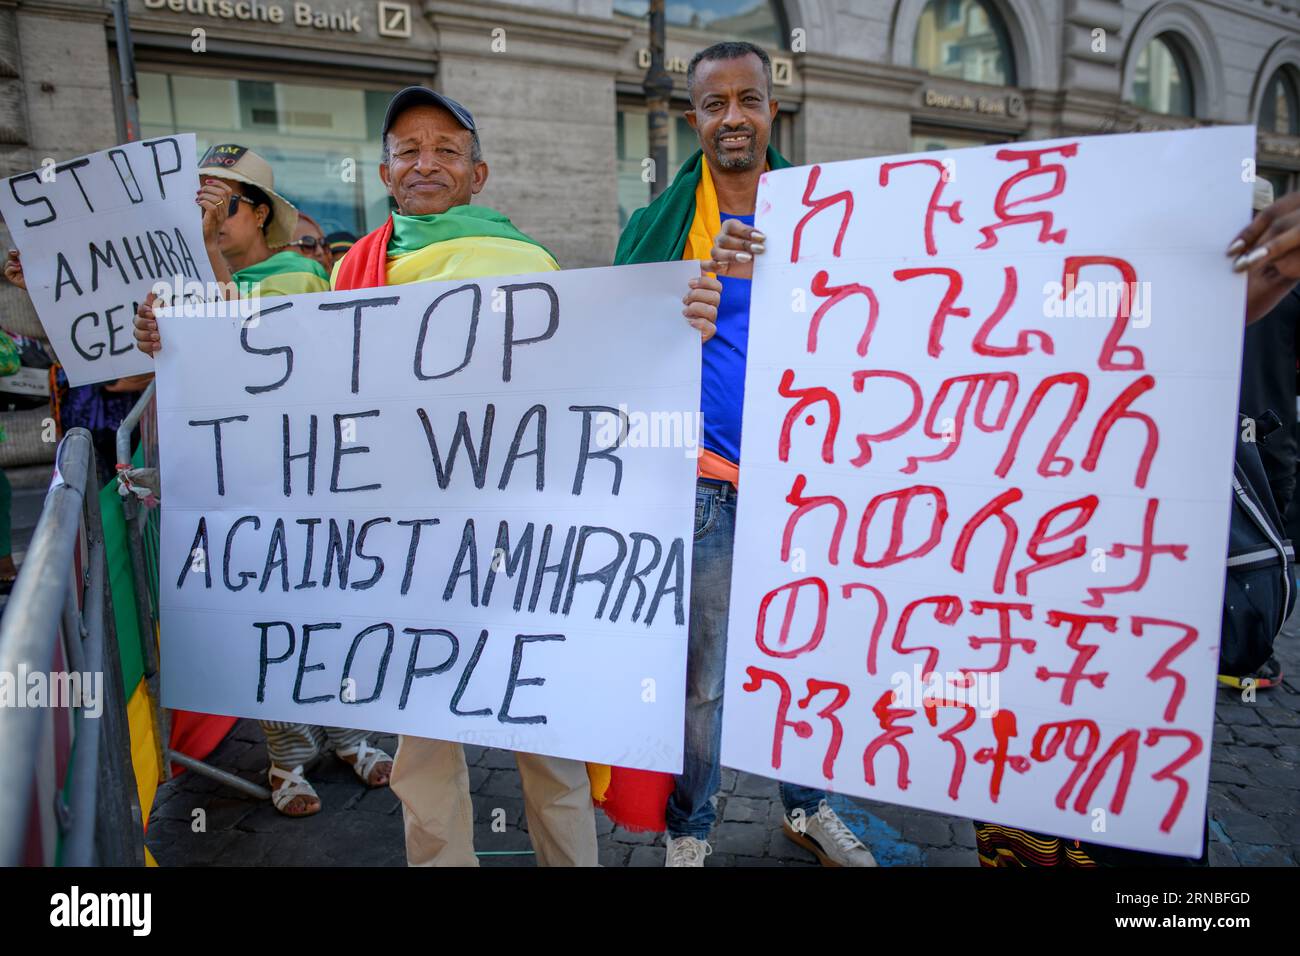 Rome, Italy. 31st Aug, 2023. Two Ethiopian men of the Amhara ethnic group hold a sign calling for an end to the war against the Amhara people and a sign in Amharic during the protest demonstration against the persecution of the Amhara in Ethiopia which took place in Rome. According to the United Nations High Commissioner for Human Rights (OHCHR), at least 183 people have been killed in clashes in the Amhara region. After the proclamation of the state of emergency at least 1,000 people were arrested: many belonging to the Amhara ethnic group and suspected of supporting the Fano militias ('volu Stock Photo